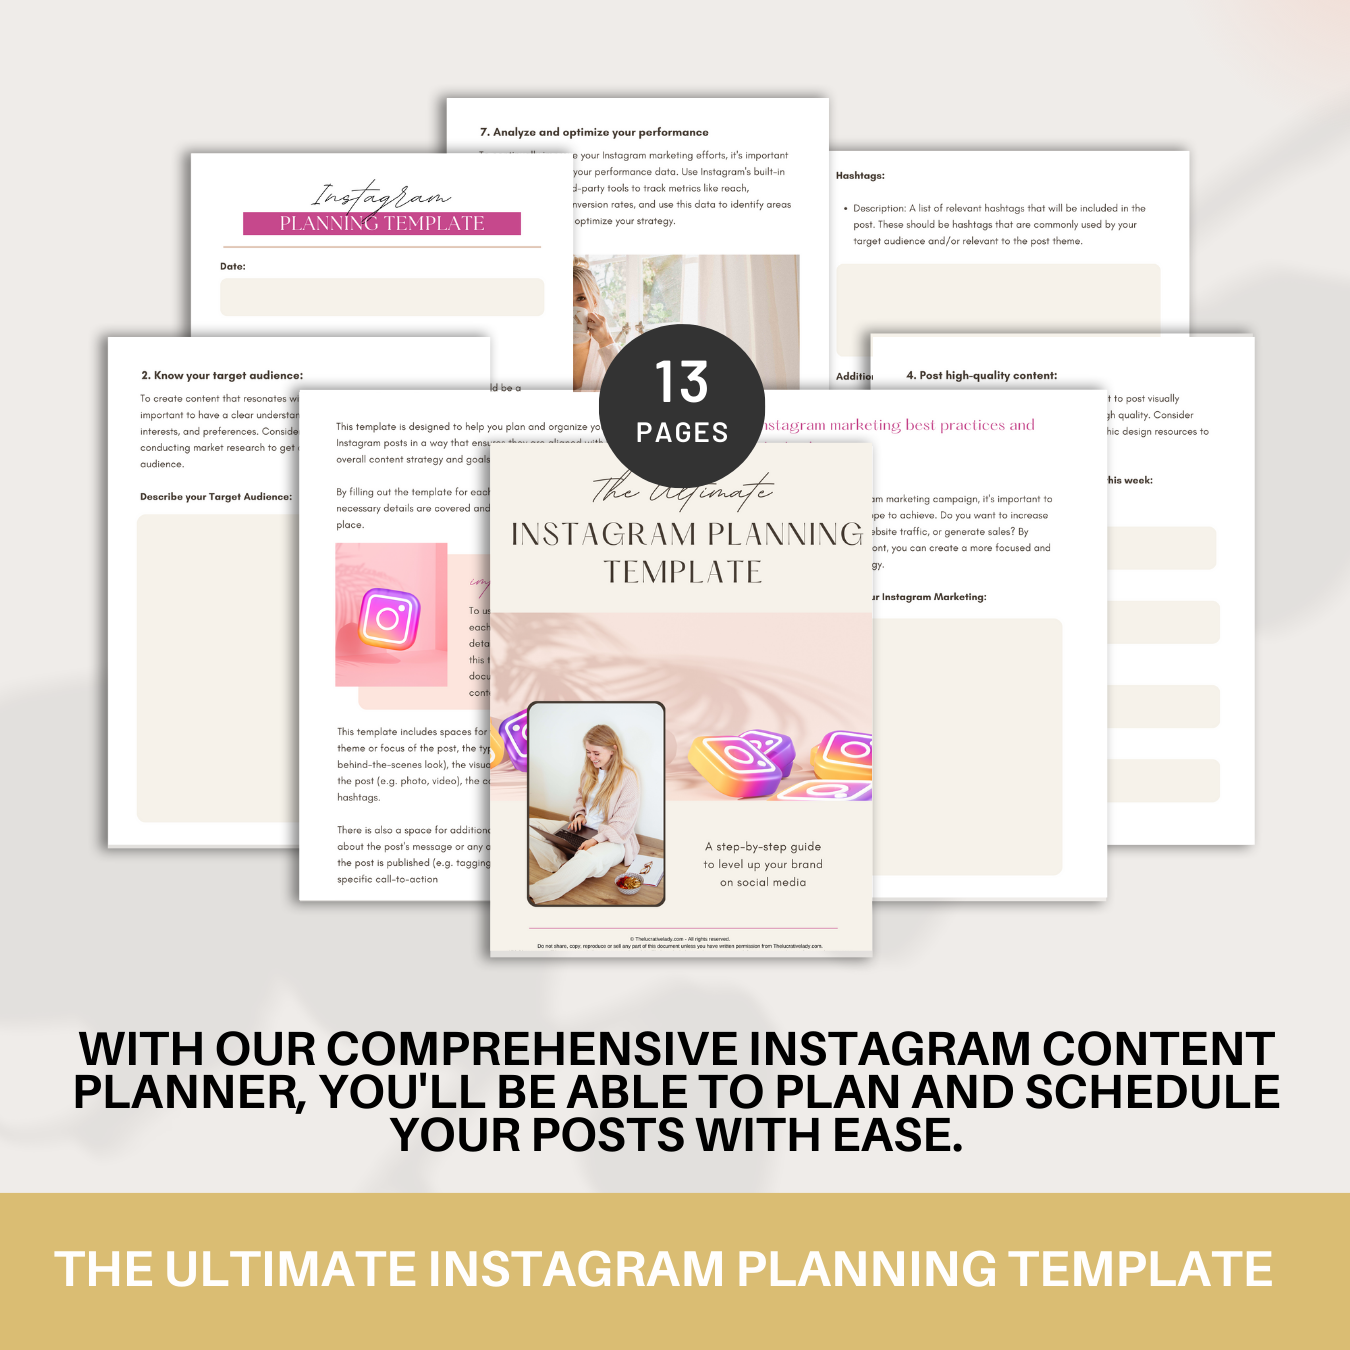 The Instagram Success Package